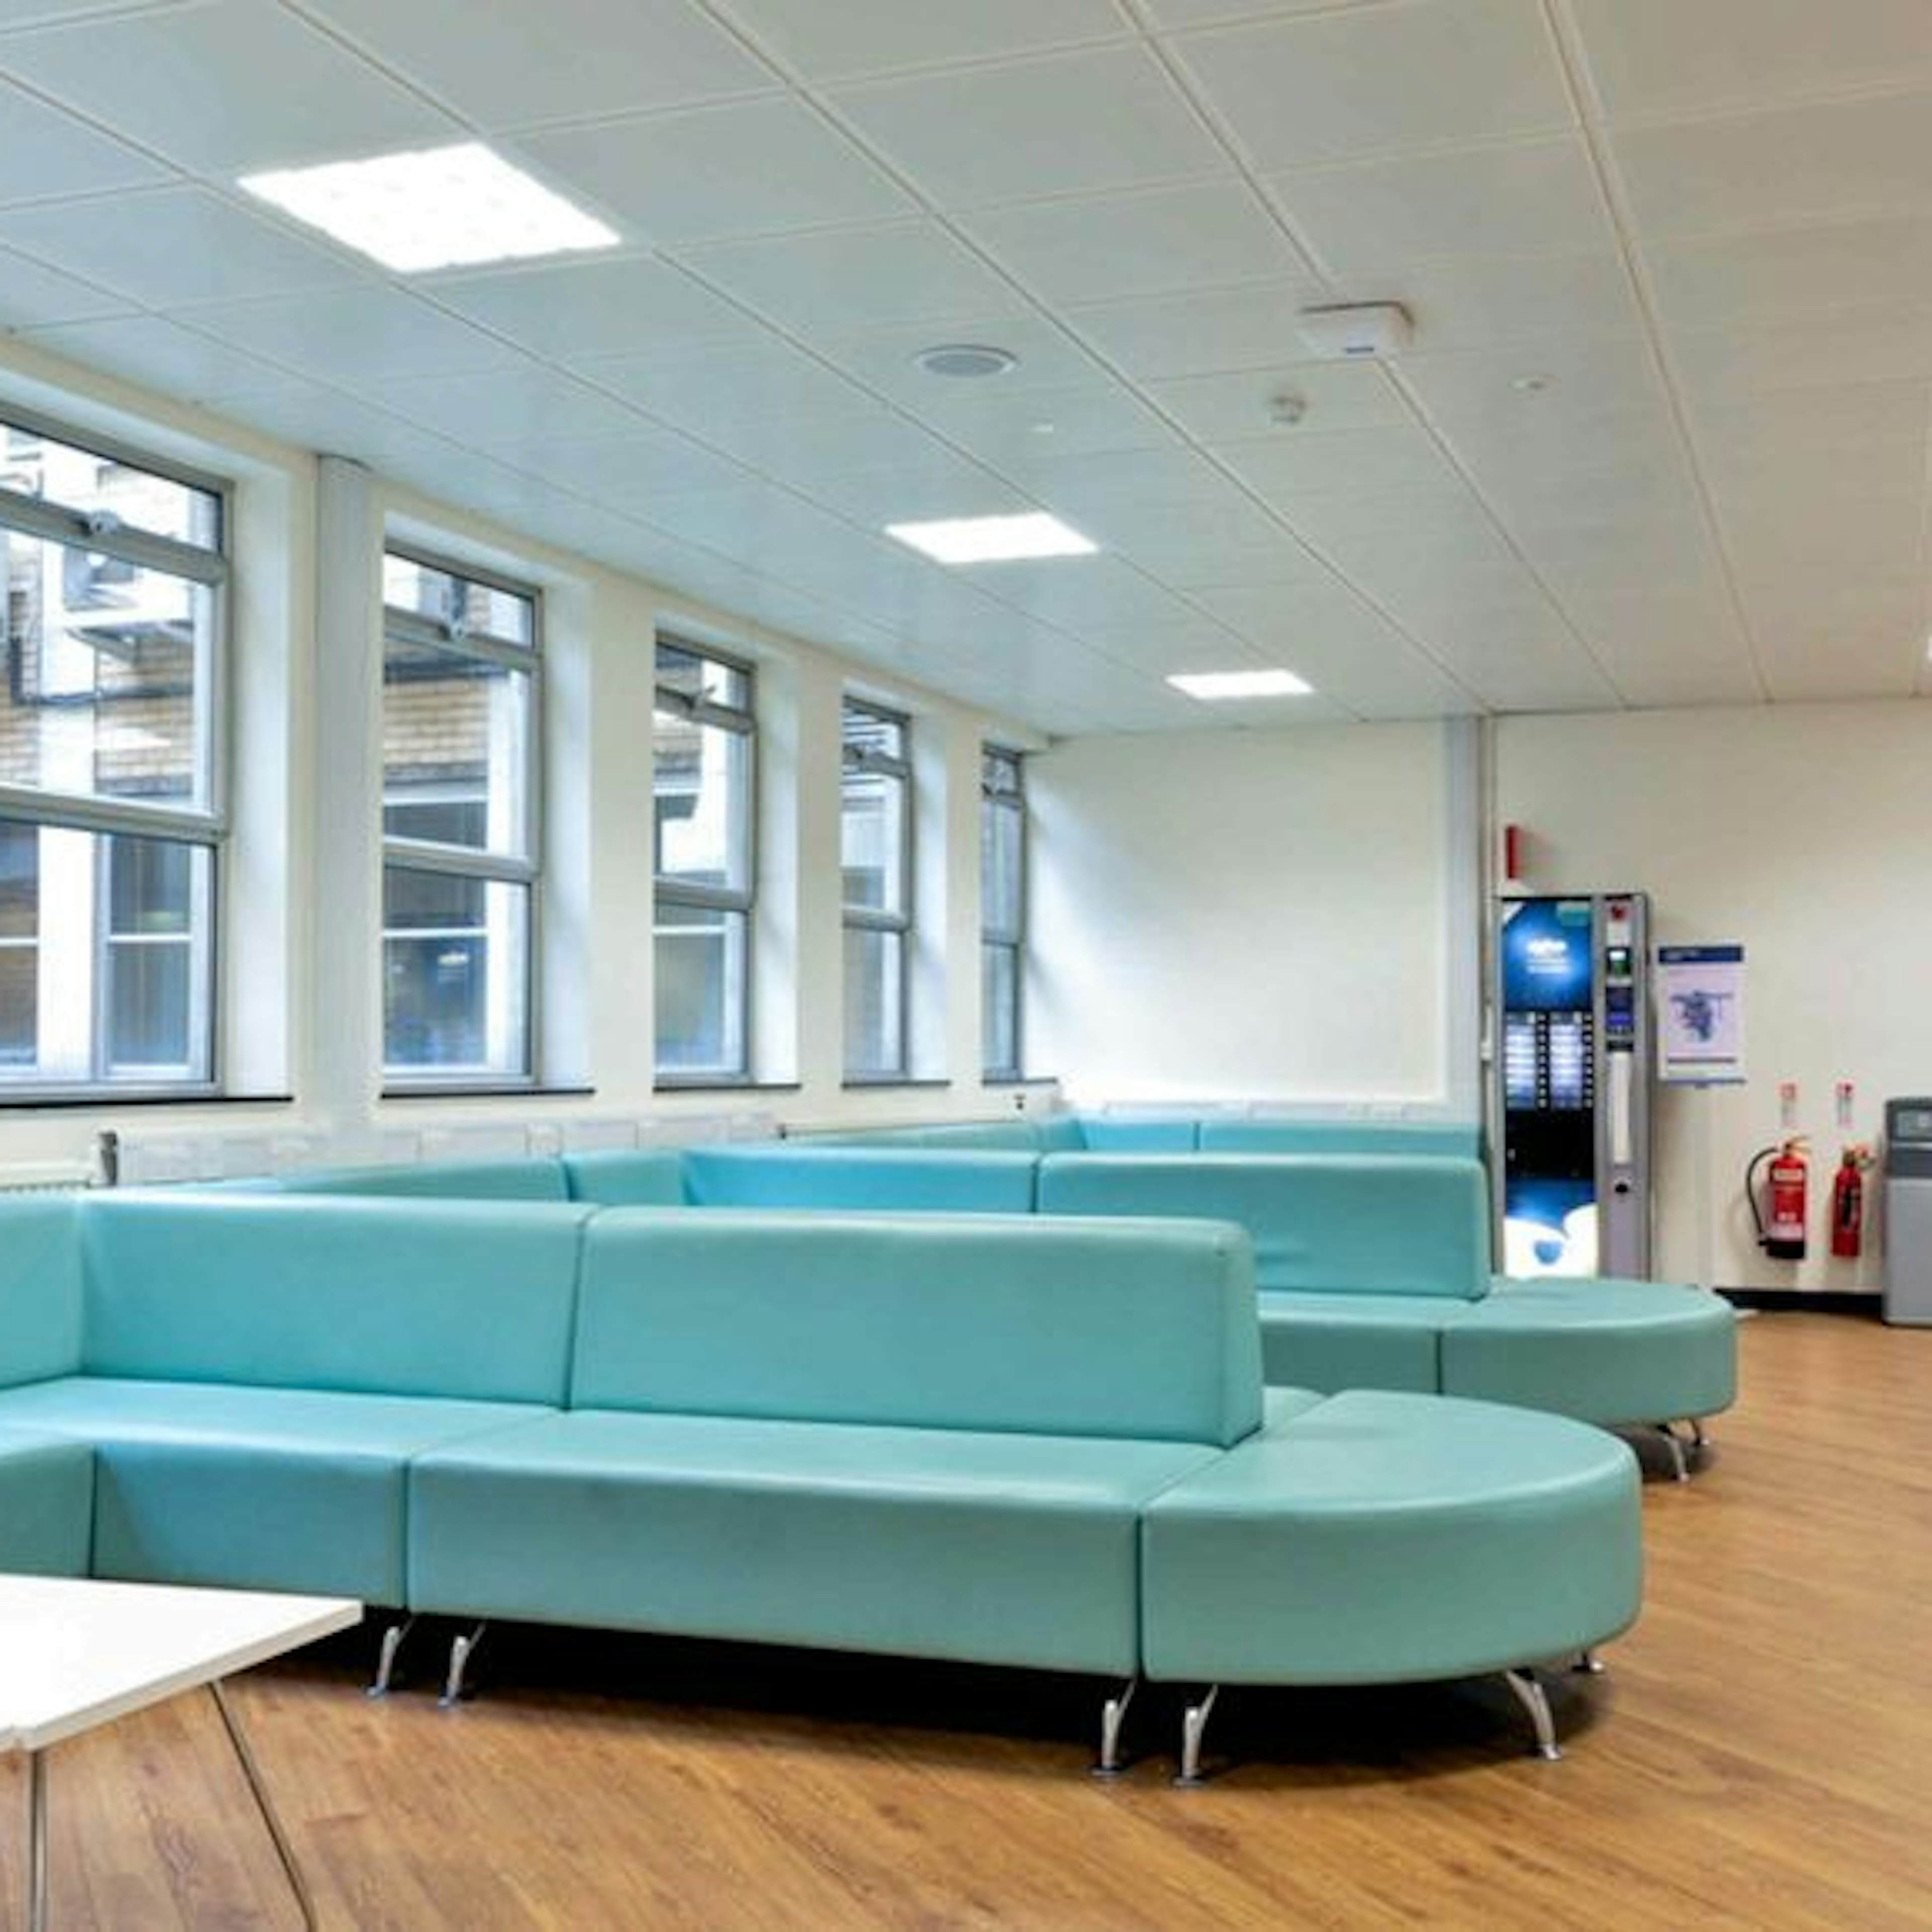 Celesta Venues by Imperial College London - image 3